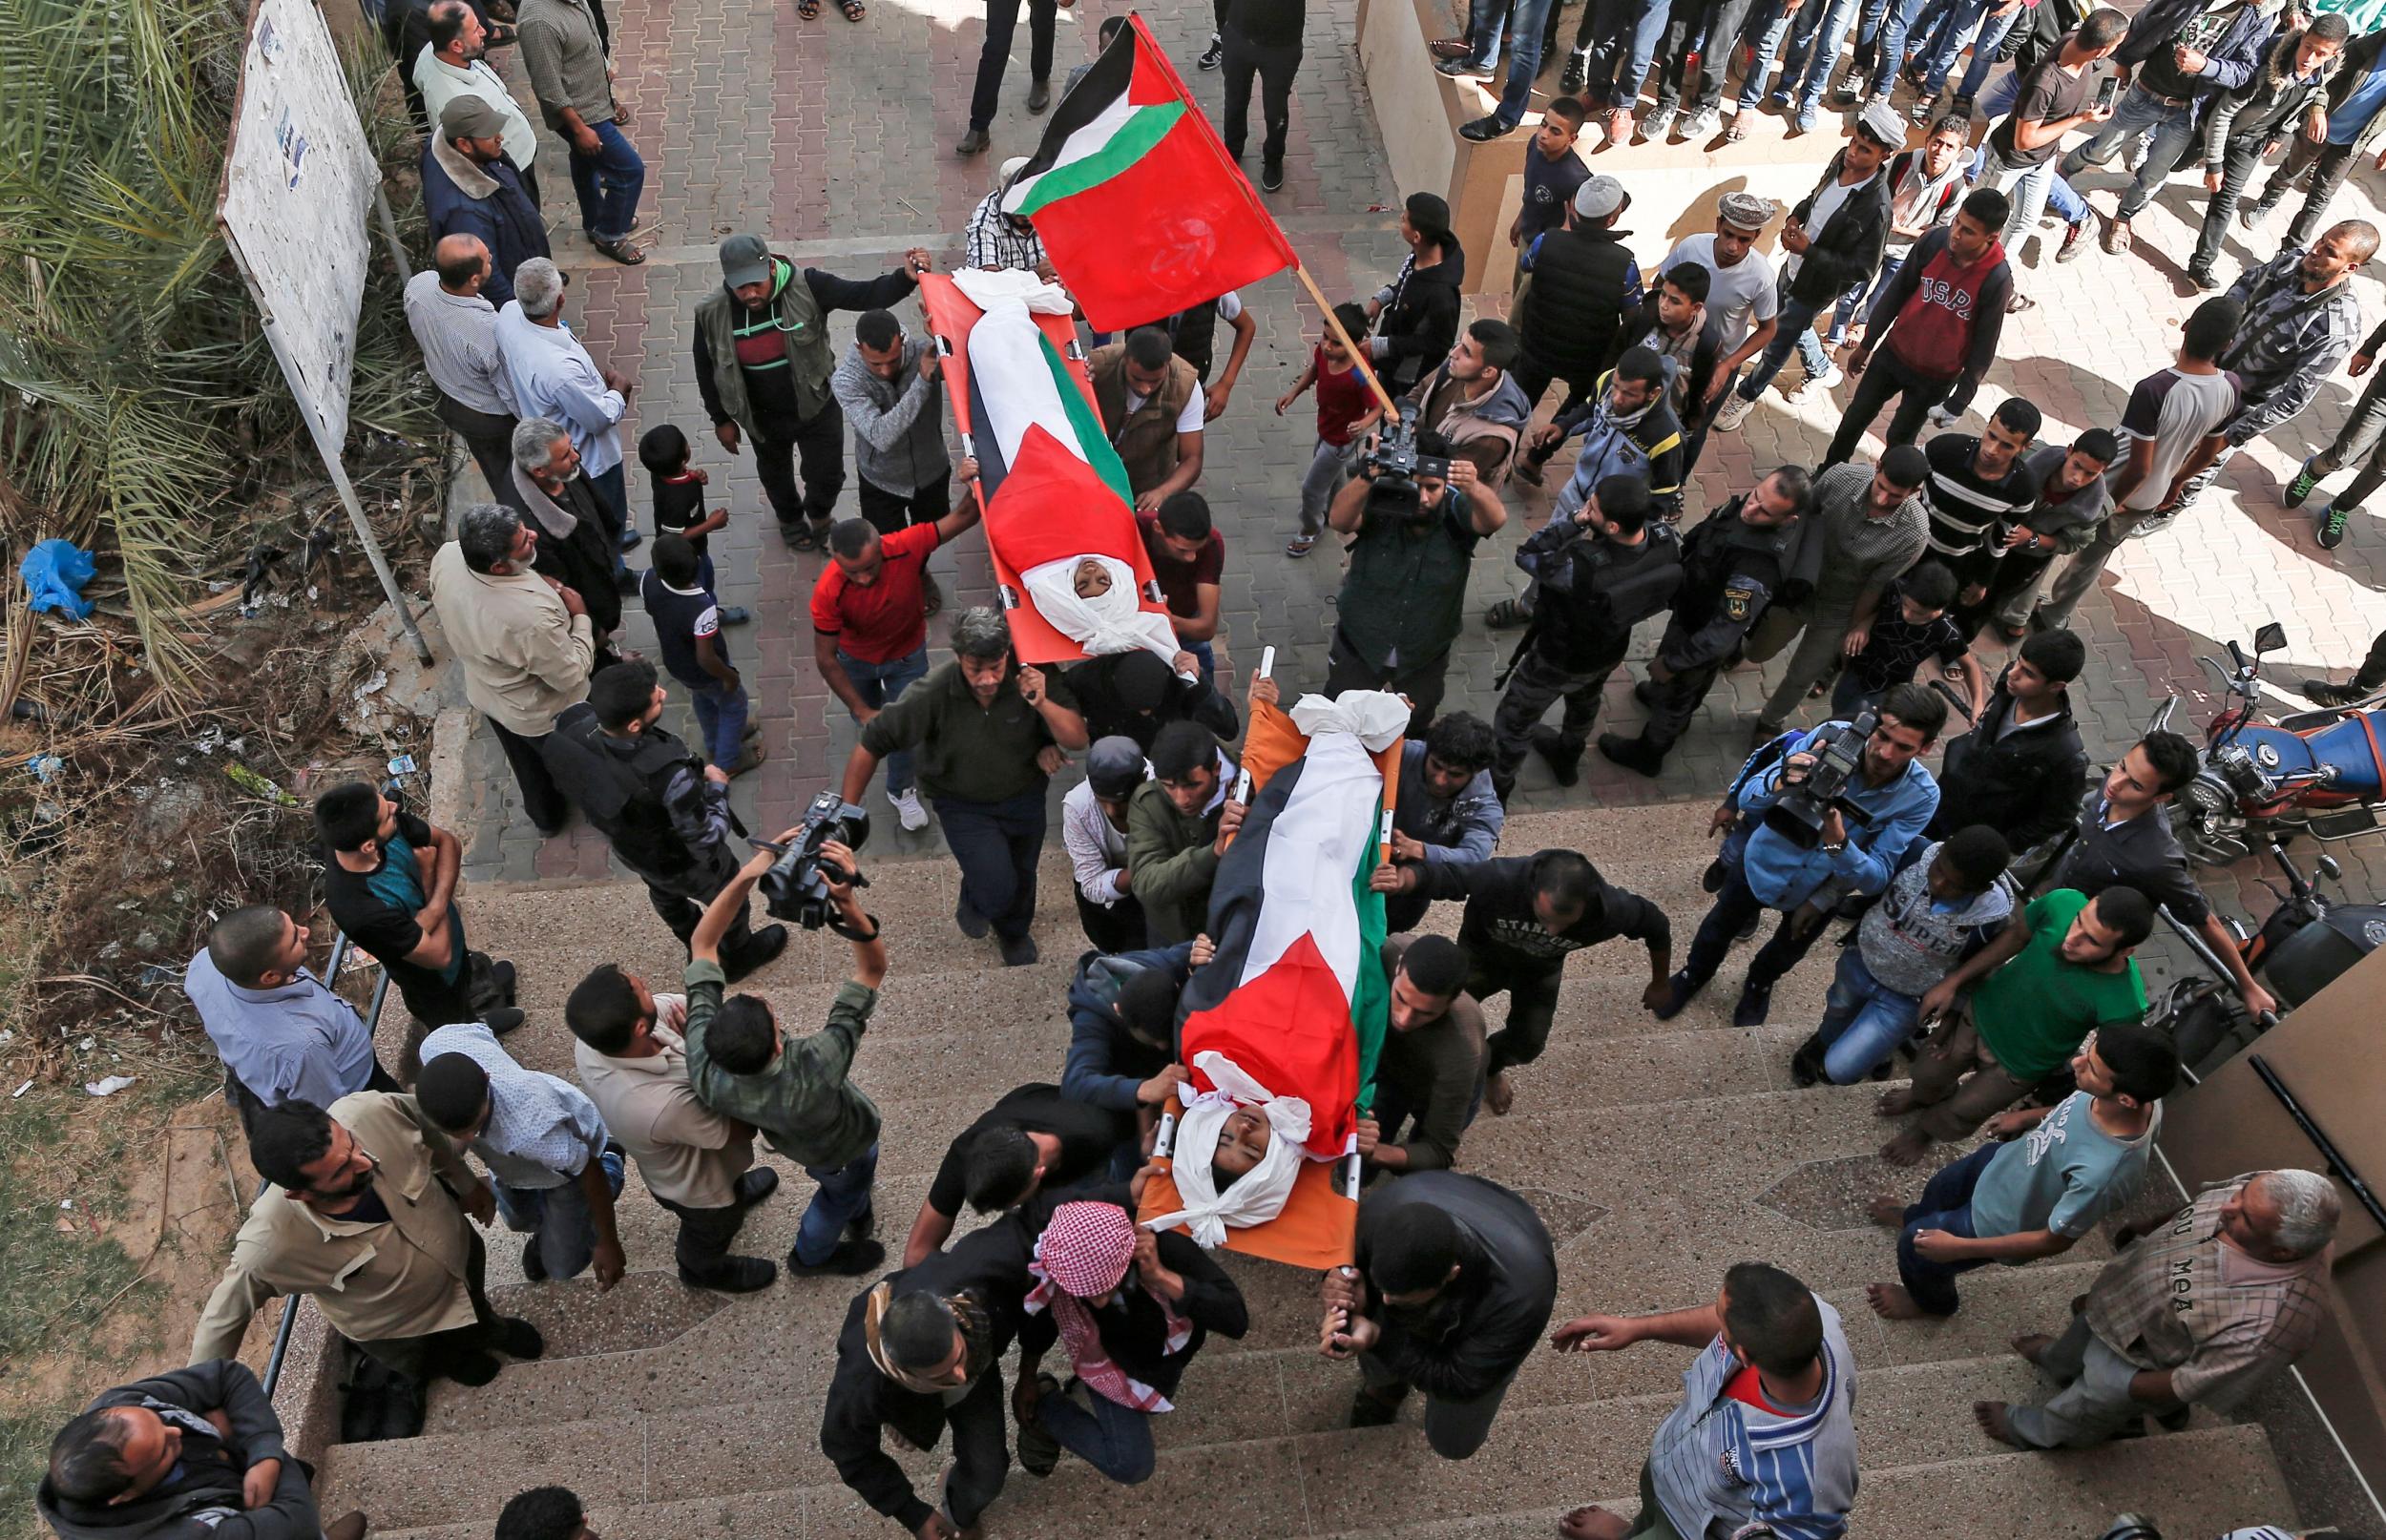 Palestinian mourners carry the bodies, draped in their national flag, of two of the three teenagers who were killed in an Israeli strike during their funeral in Deir el-Balah in the central Gaza Strip Photo: MAHMUD HAMS/AFP/Getty Images